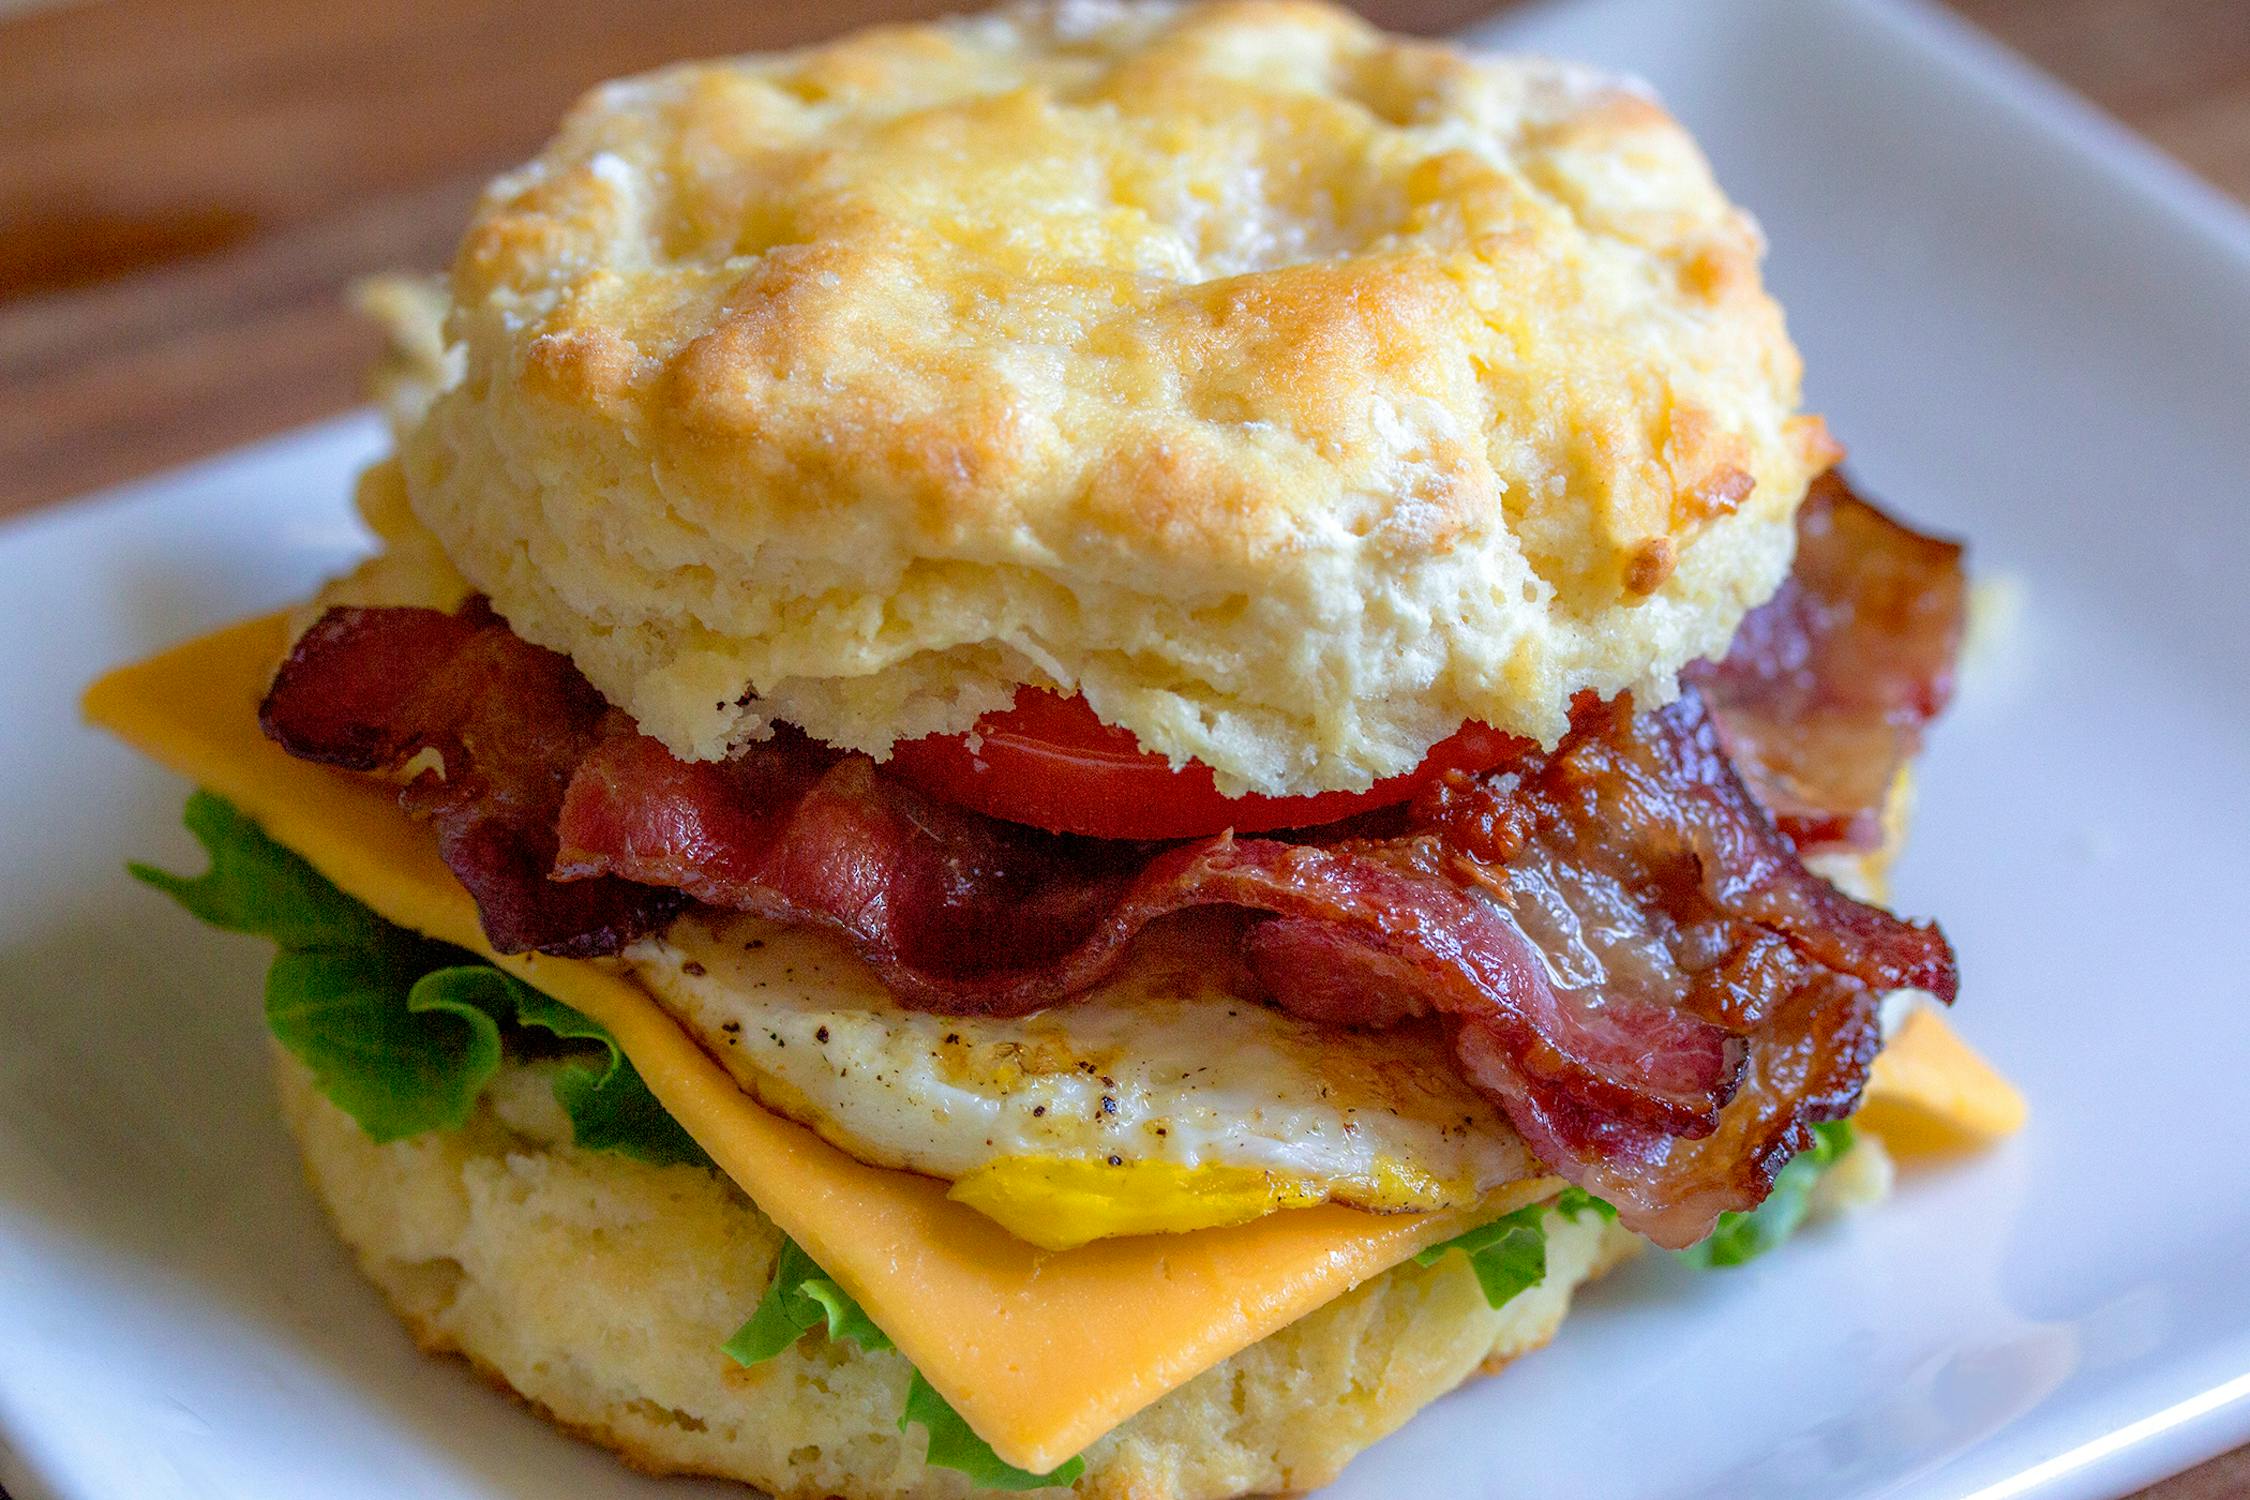 sausage, egg, and cheese sandwich on biscuit